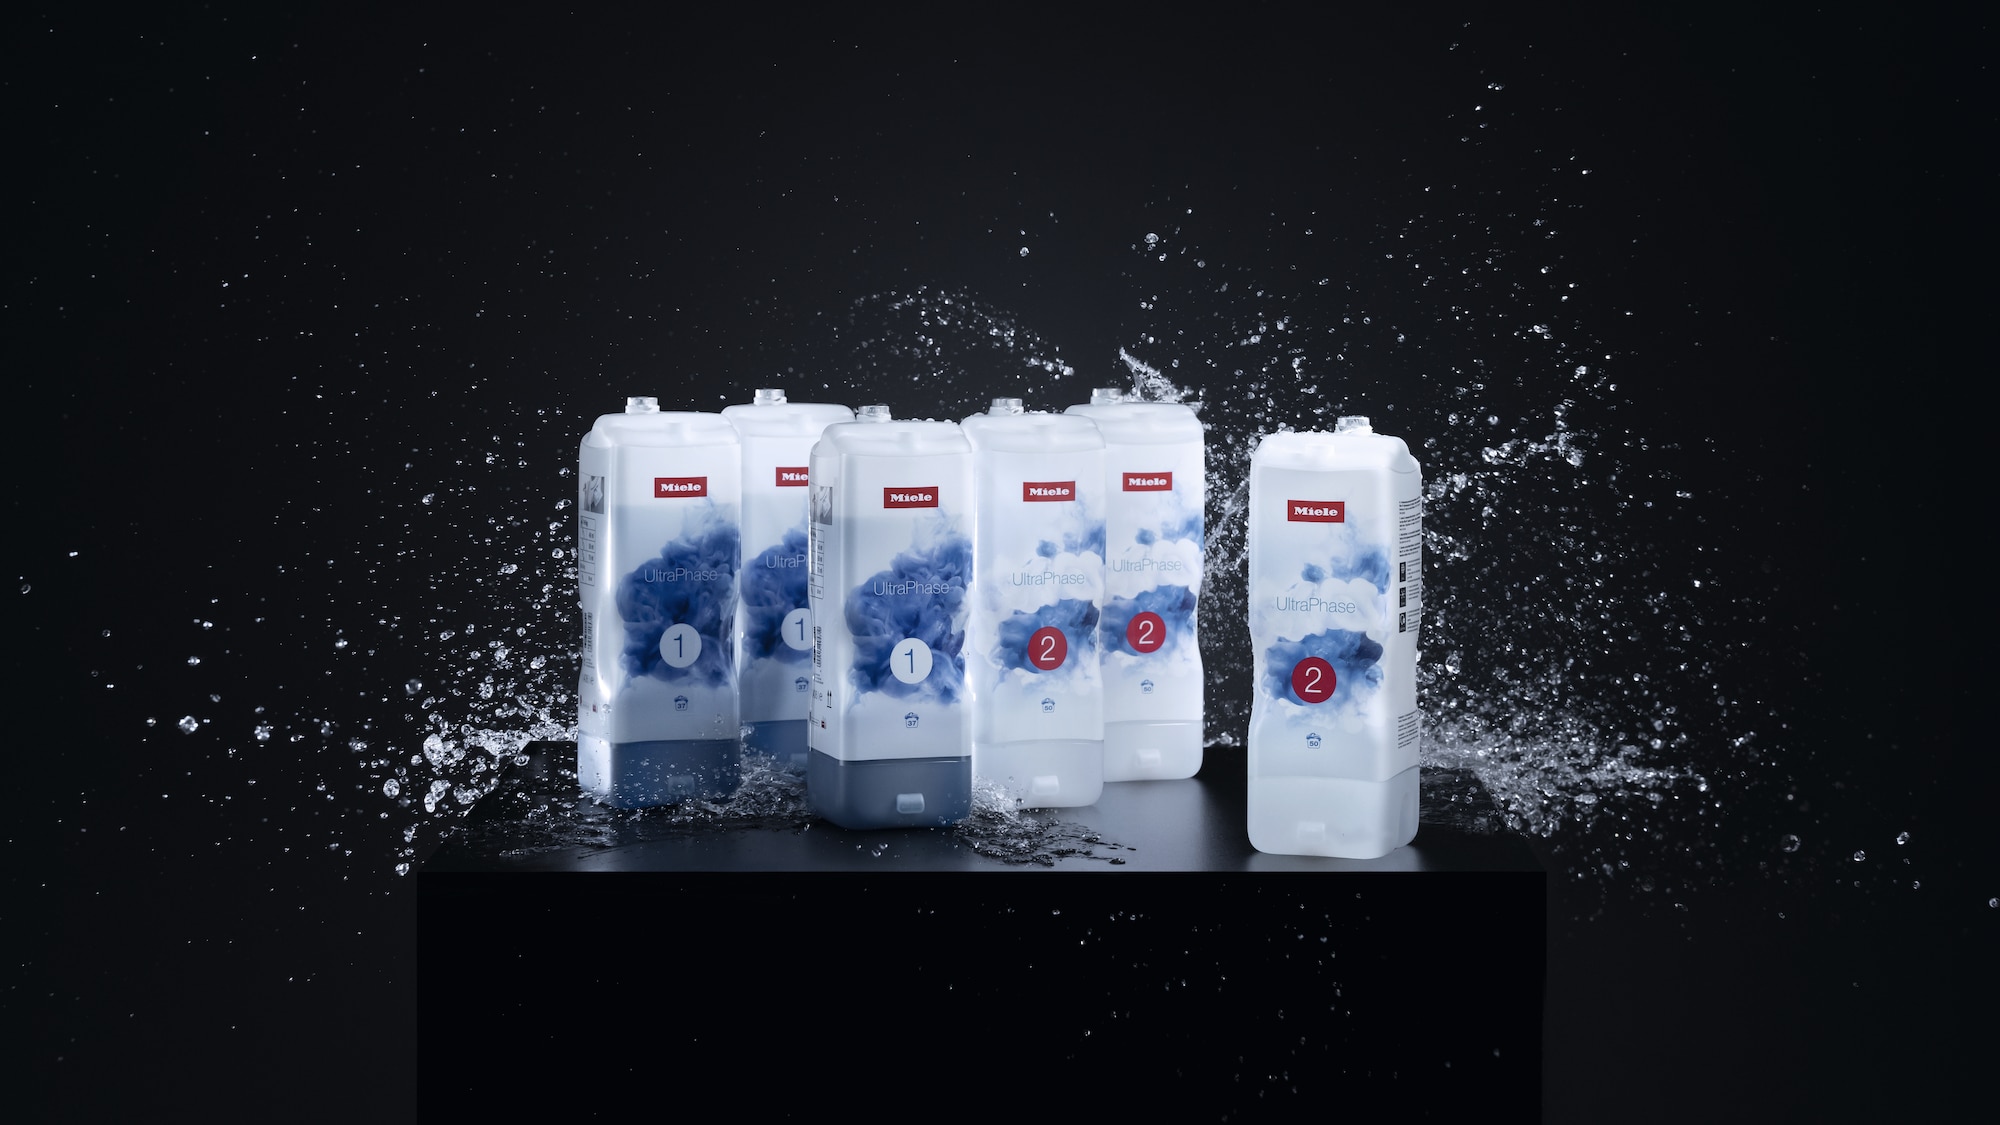 Miele UltraPhase  Our most effective and easy-to-use laundry detergent